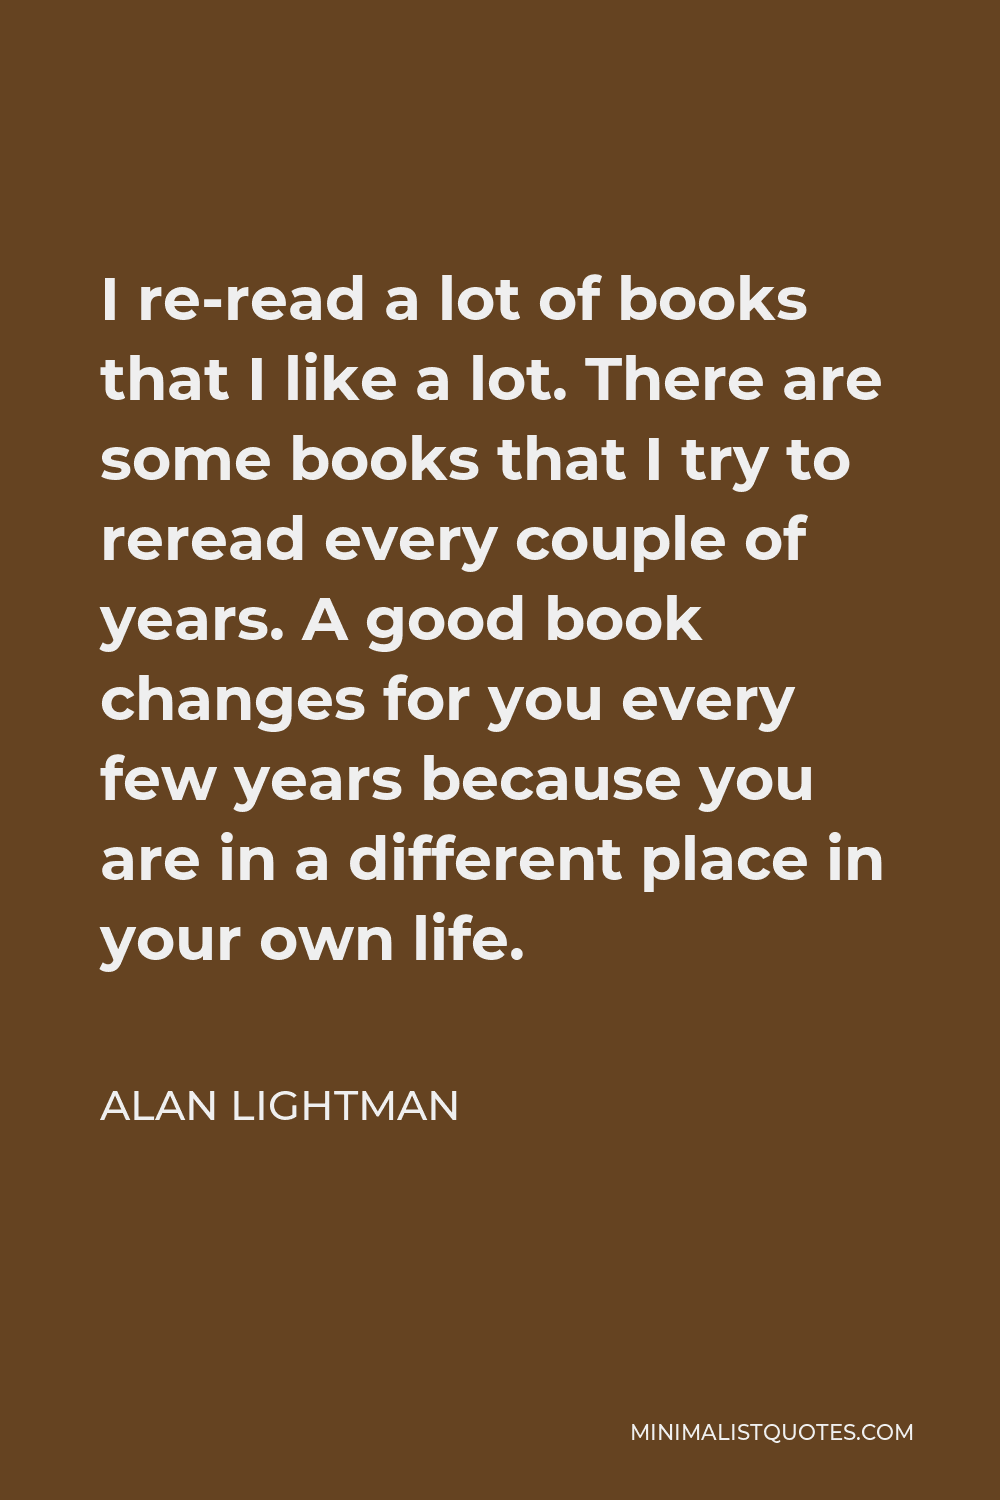 Alan Lightman Quote - I re-read a lot of books that I like a lot. There are some books that I try to reread every couple of years. A good book changes for you every few years because you are in a different place in your own life.